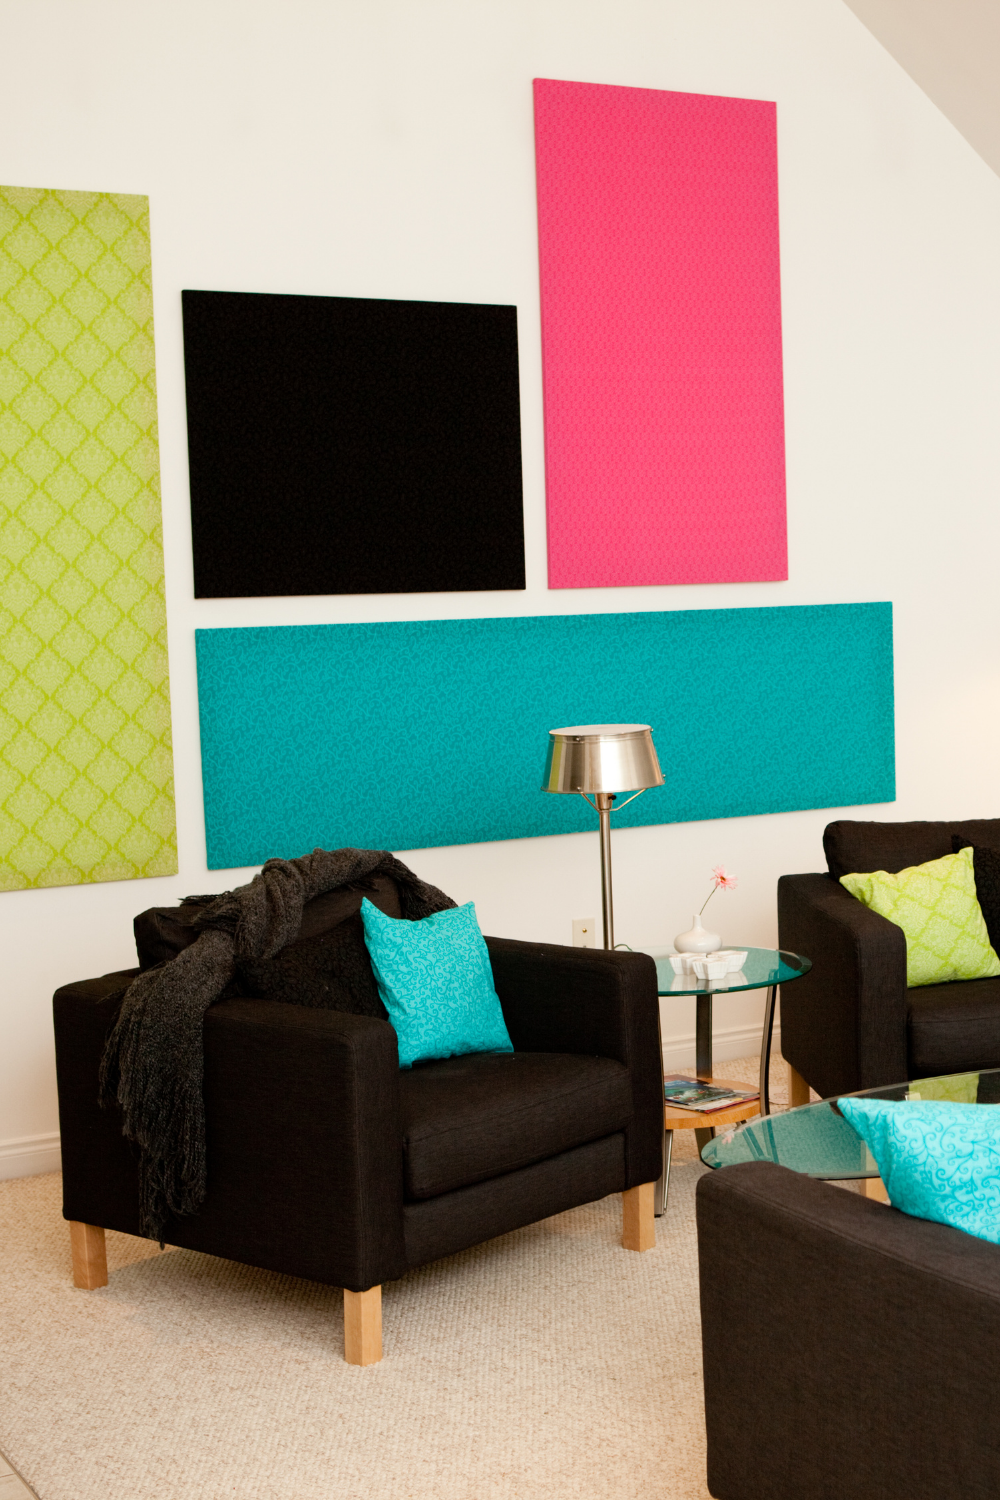 5 Ways to Incorporate More Color Into Your Home